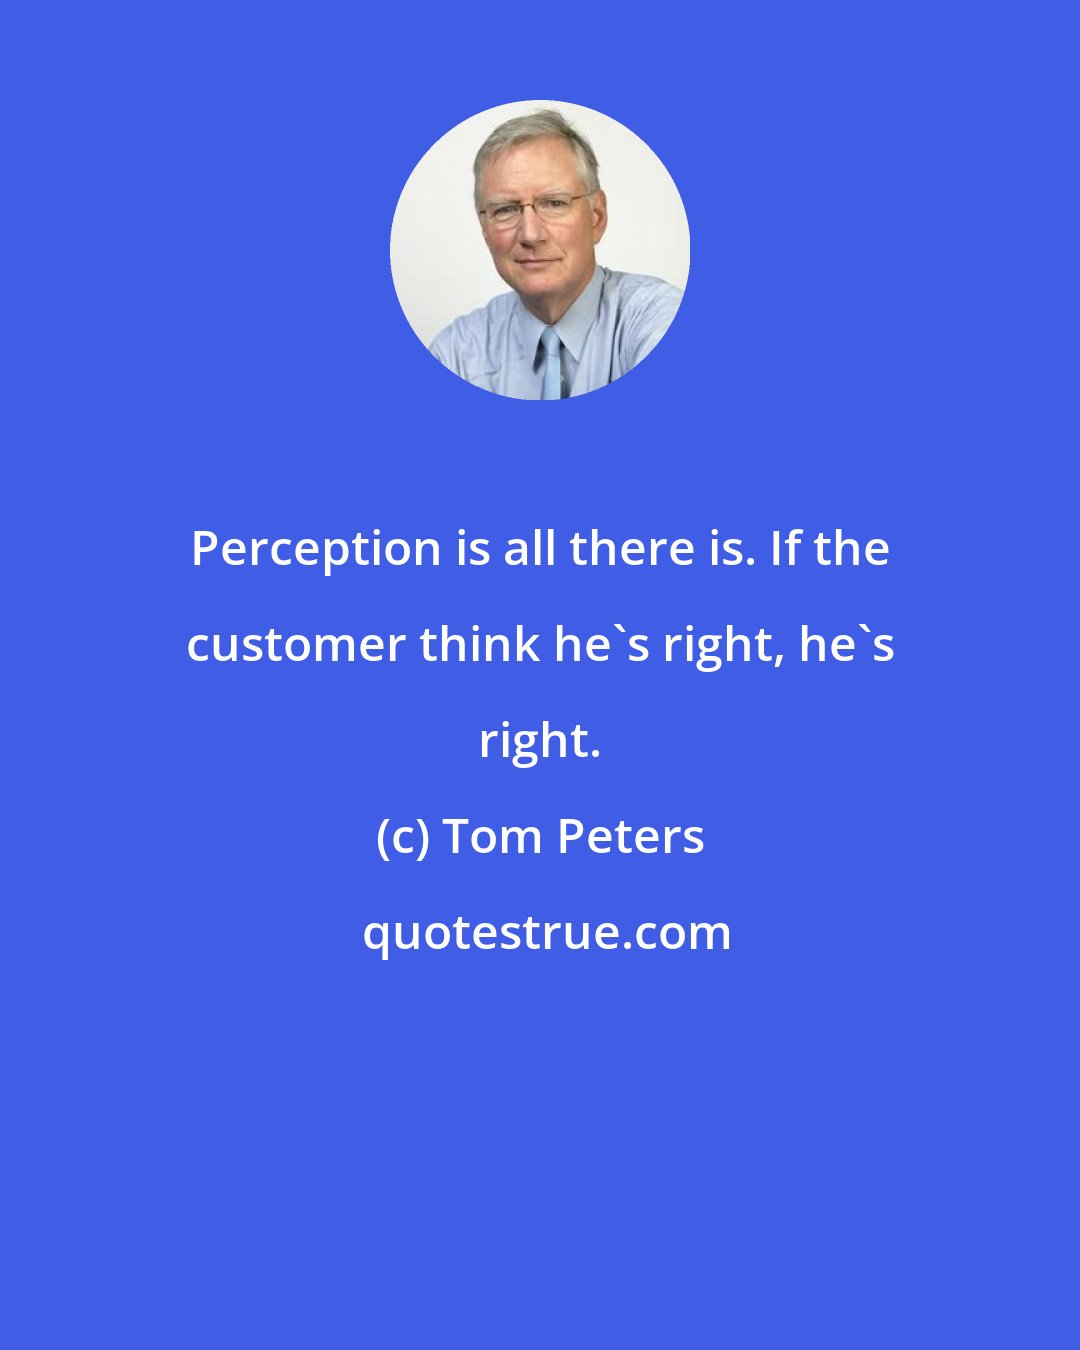 Tom Peters: Perception is all there is. If the customer think he's right, he's right.